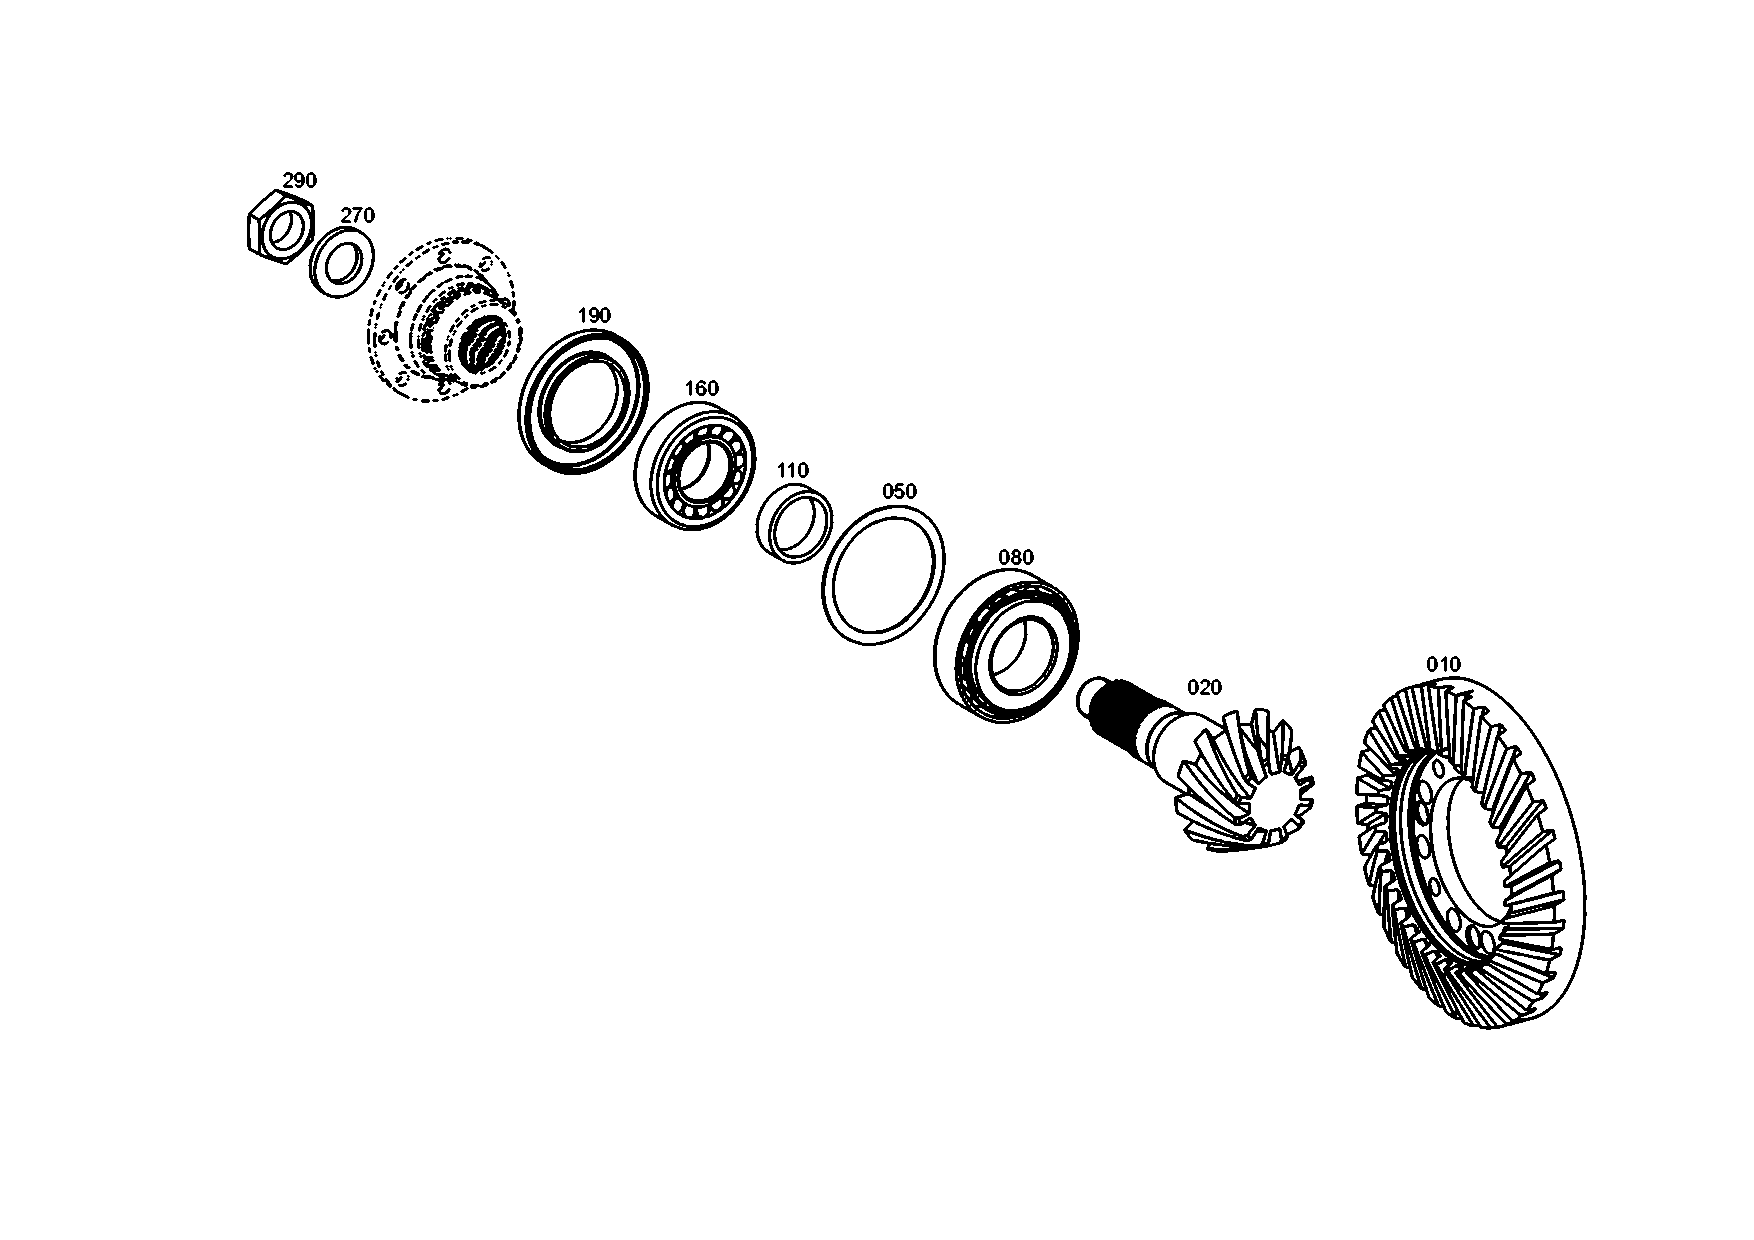 drawing for CATERPILLAR INC. 7029702 - RING (figure 4)